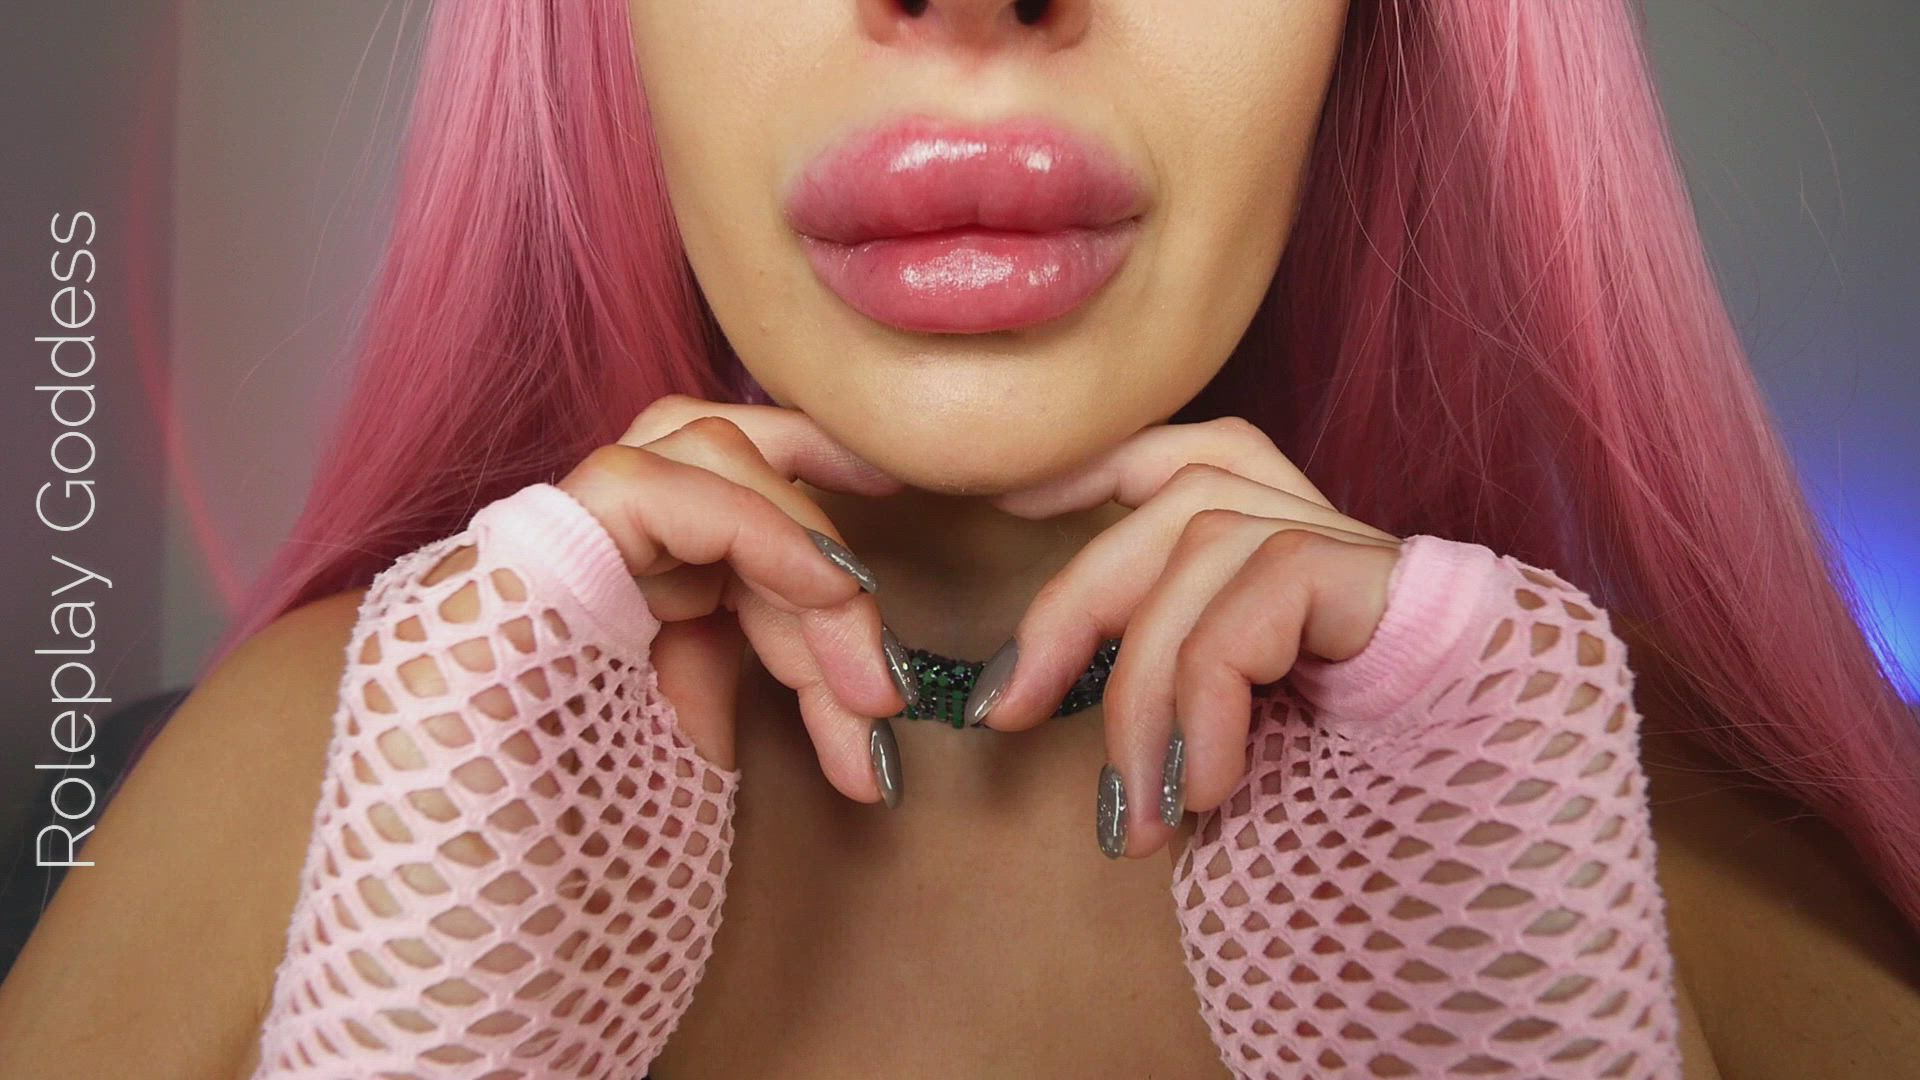 Lips porn video with onlyfans model xRGHMx <strong>@roleplayg0ddess</strong>